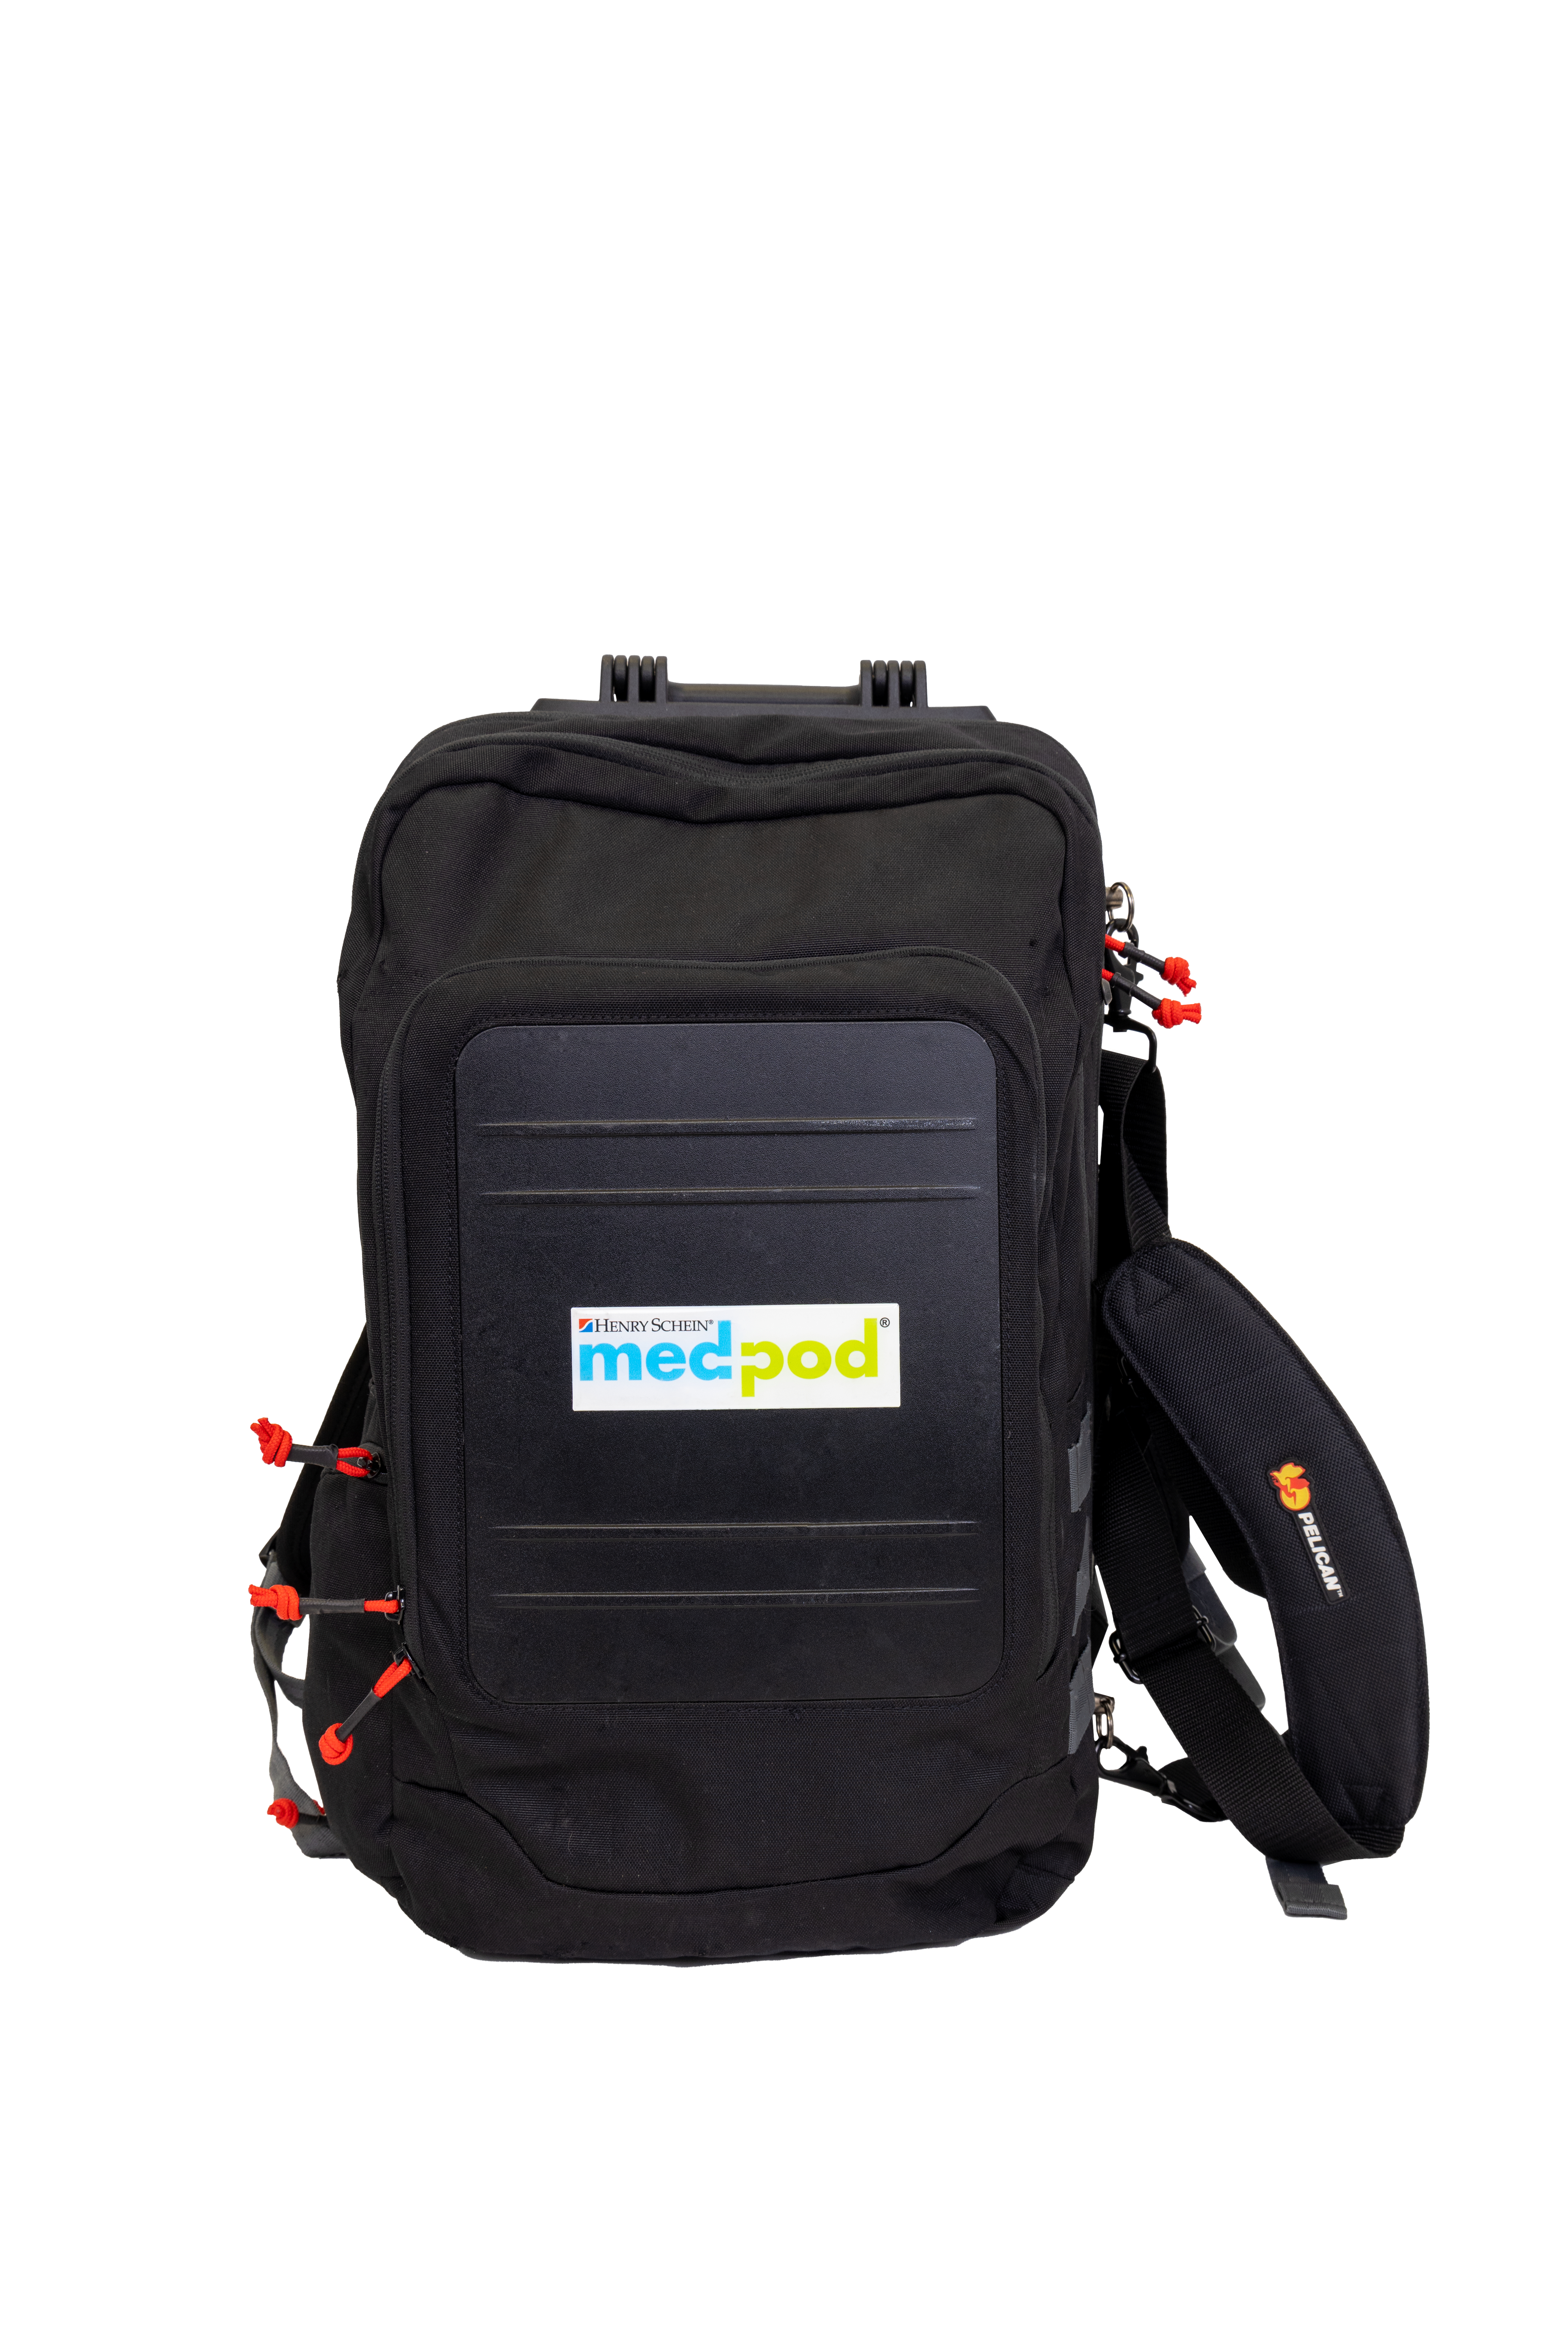 Amazon.com: PS Medical 10727 MedPac 500, Navy : Clothing, Shoes & Jewelry